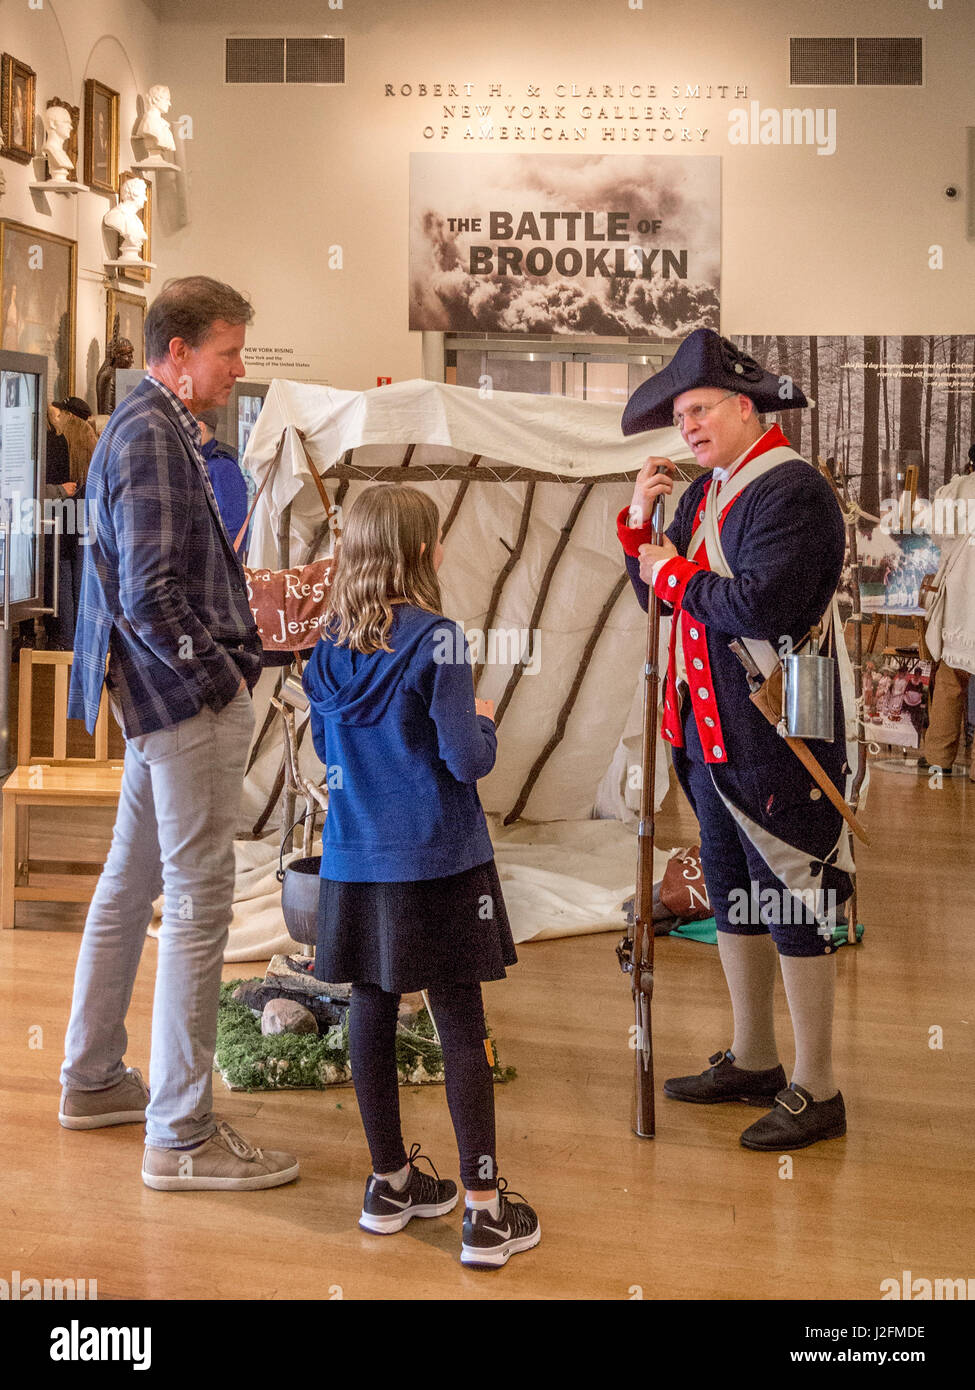 Wearing the uniform of  a Continental soldier in the American Revolution, a docent at the New-York Historical Society museum in New York City explains an exhibit on the 1776 Battle of Brooklyn to a father and daughter. Note sign and tent in background. Stock Photo